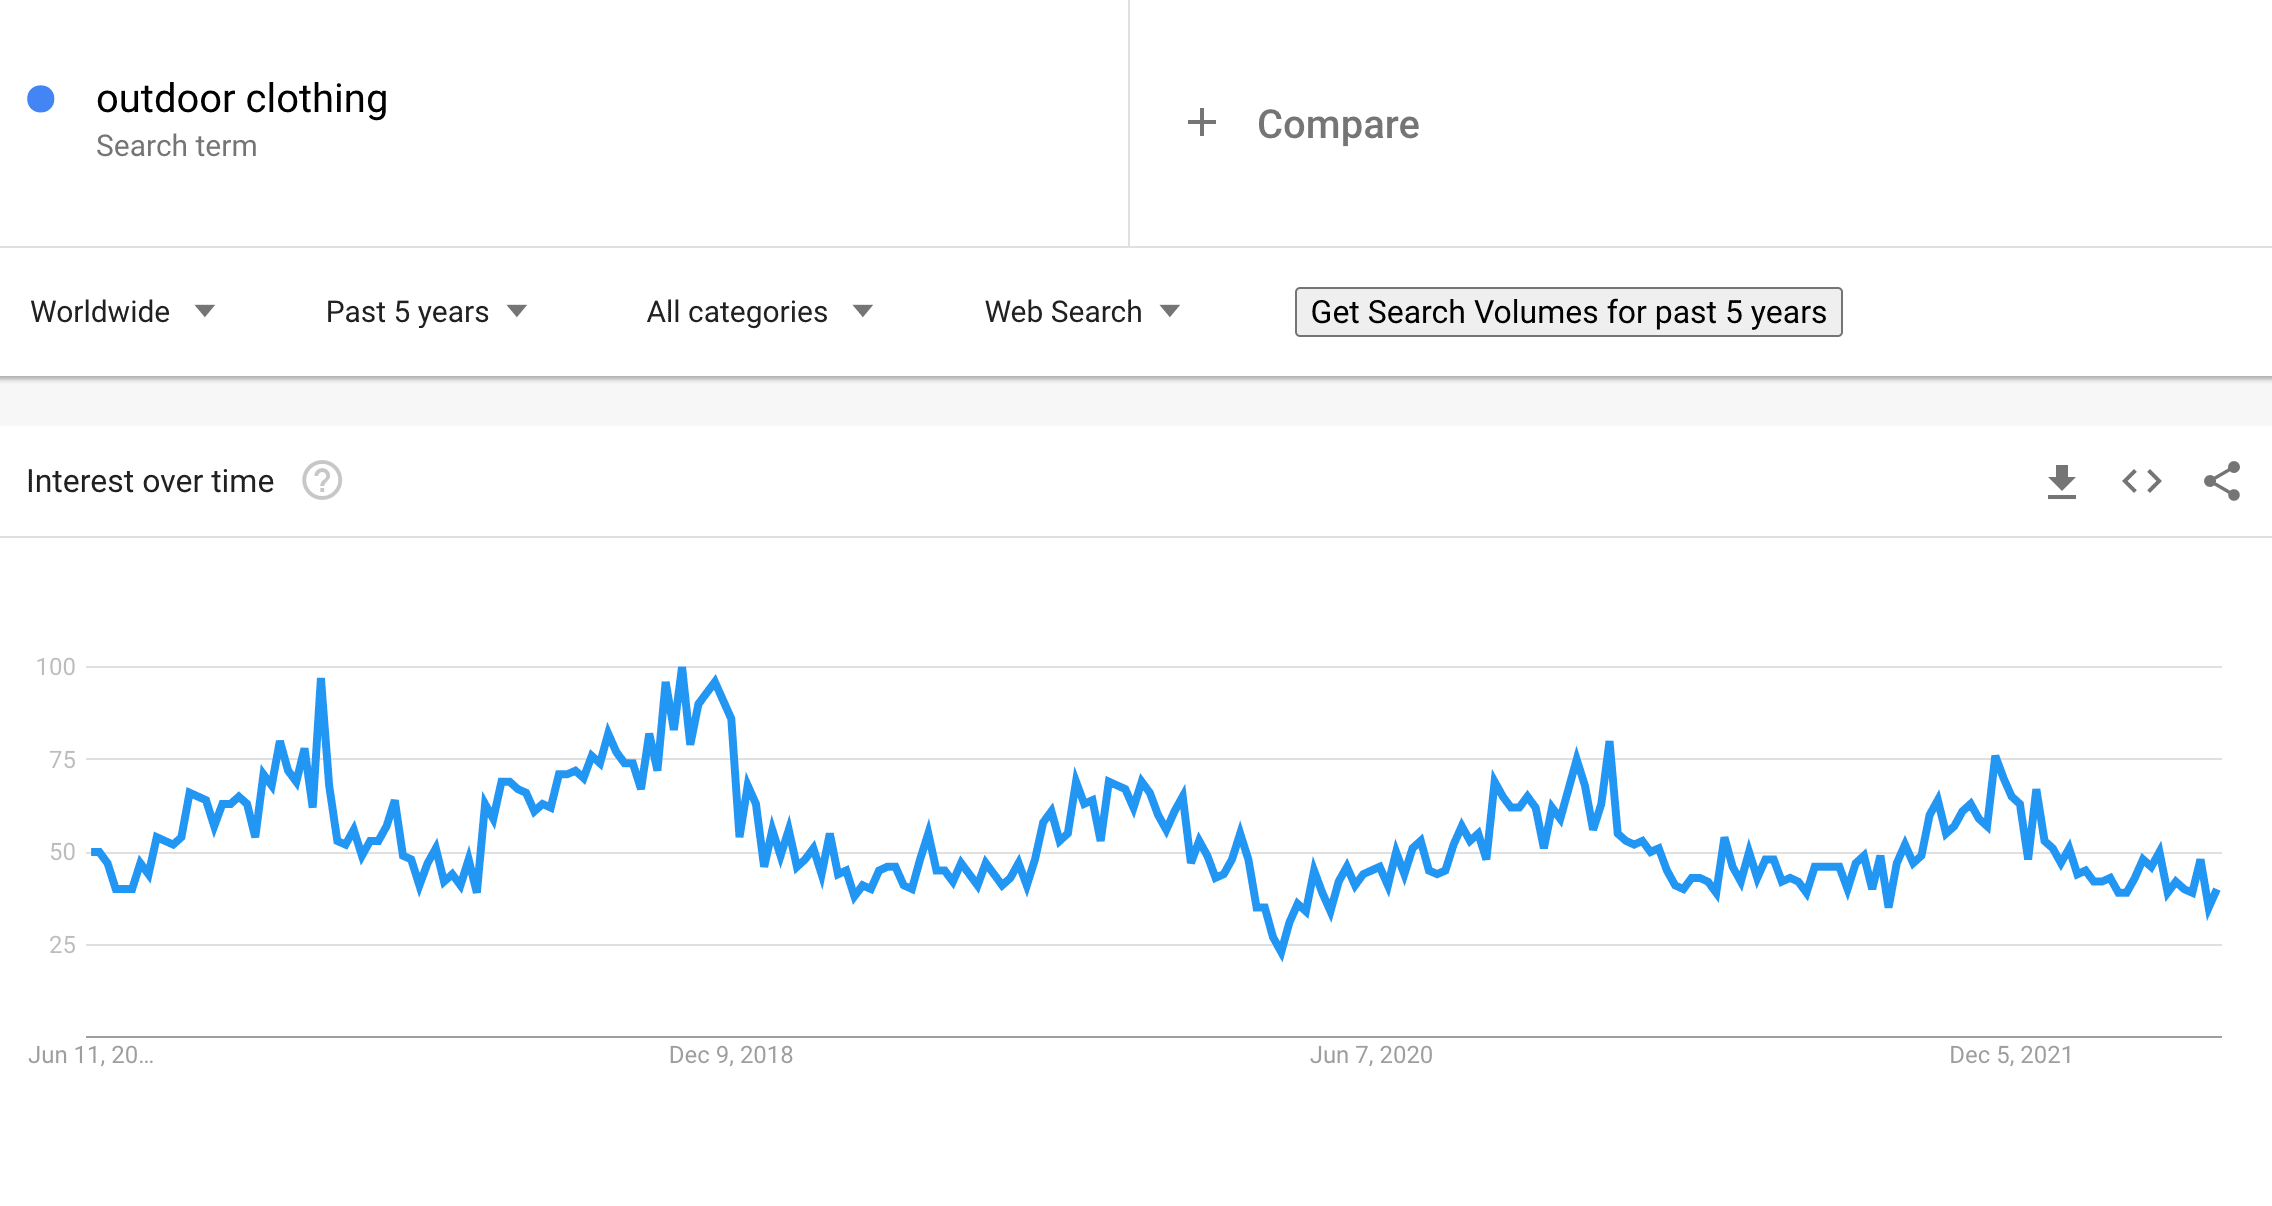 Outdoor clothing on Google Trends